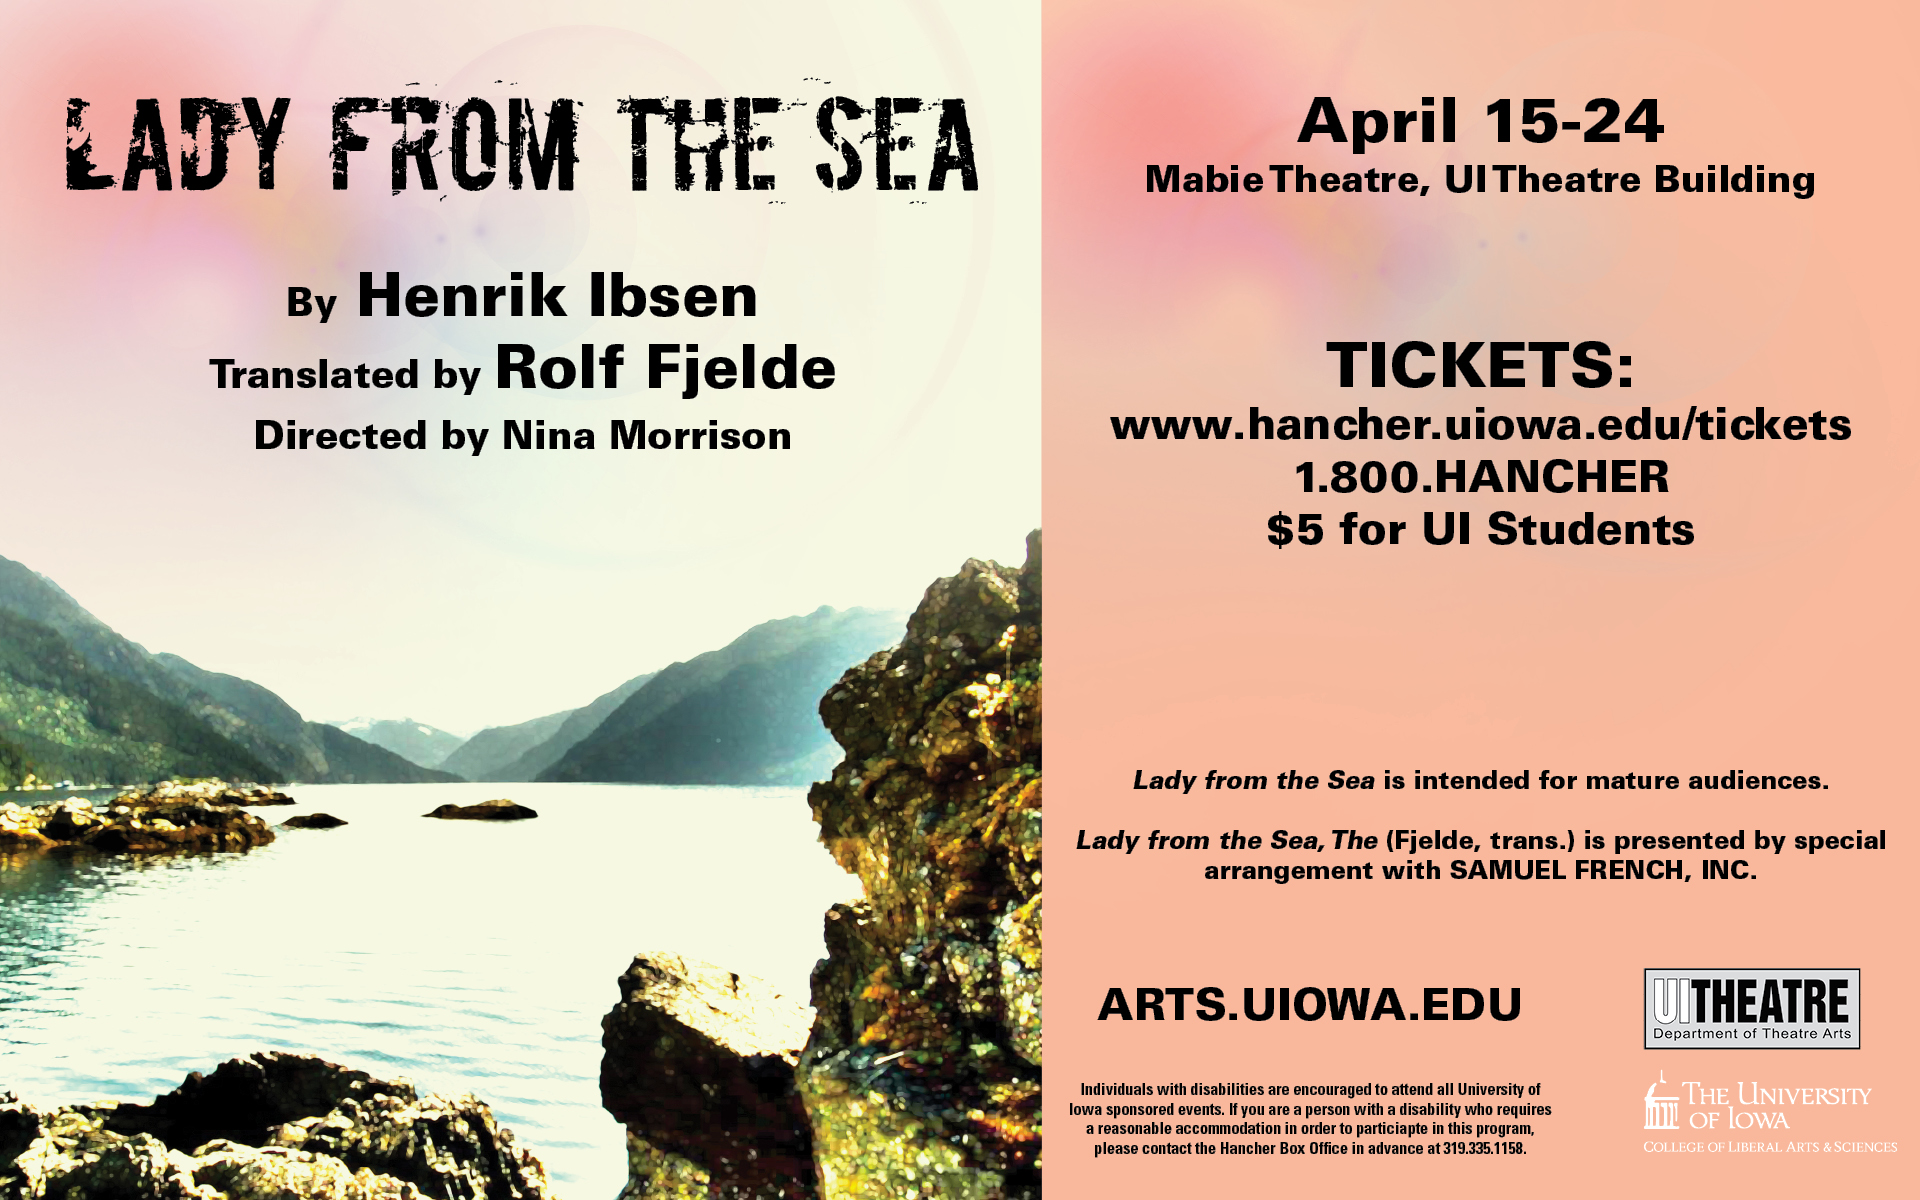 Lady from the Sea, by Henrik Ibsen. Translated by Rolf Fjelde, Directed by Nina Morrison. April 15-24, Mabie Theatre, UI Theatre Building.